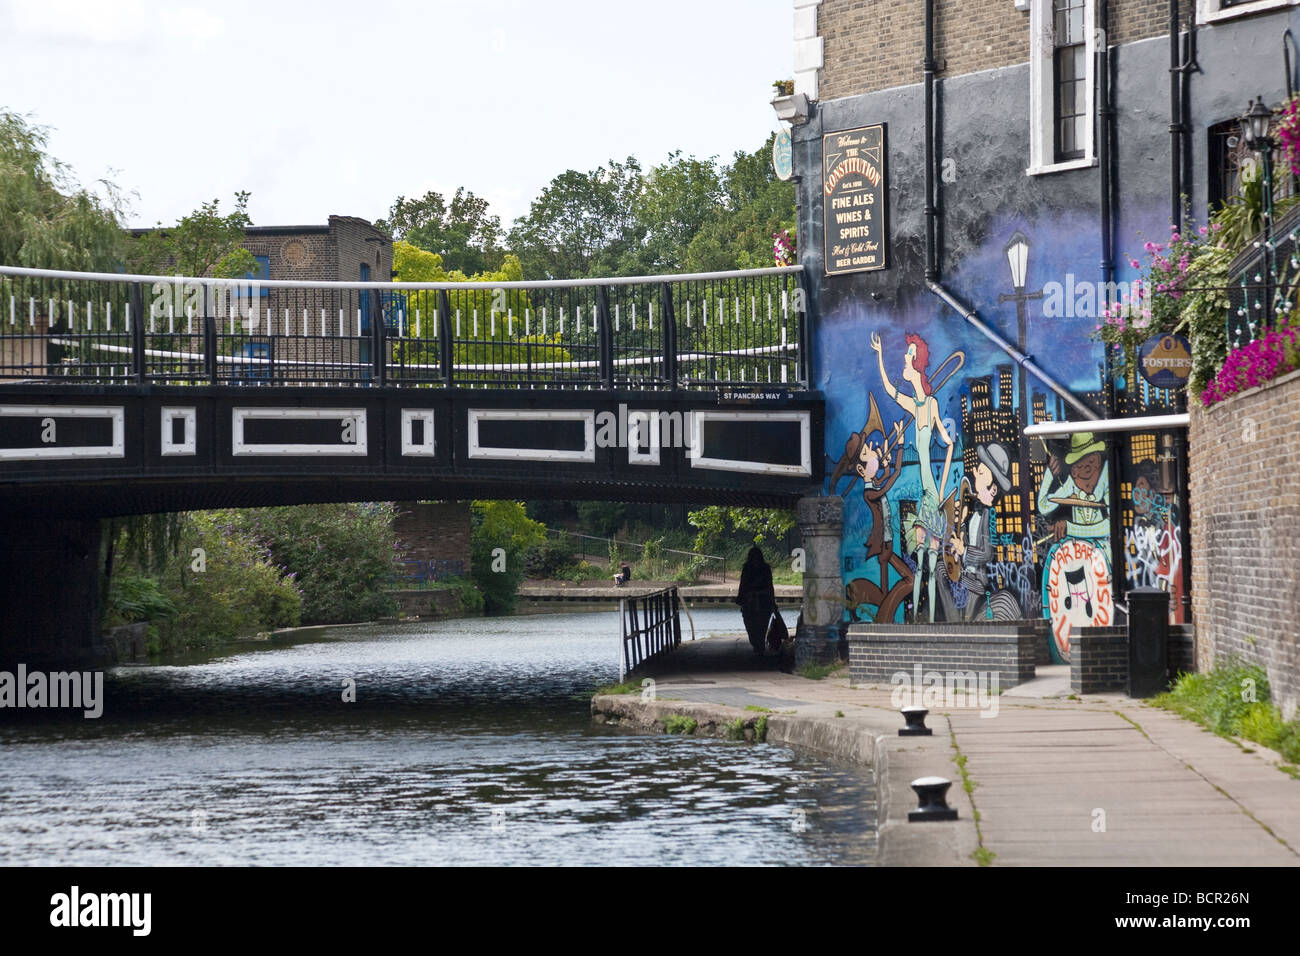 Exterior of The Constitution pub, bridge over St Pancras Way, and Regents Canal. Camden, London, England, UK Stock Photo